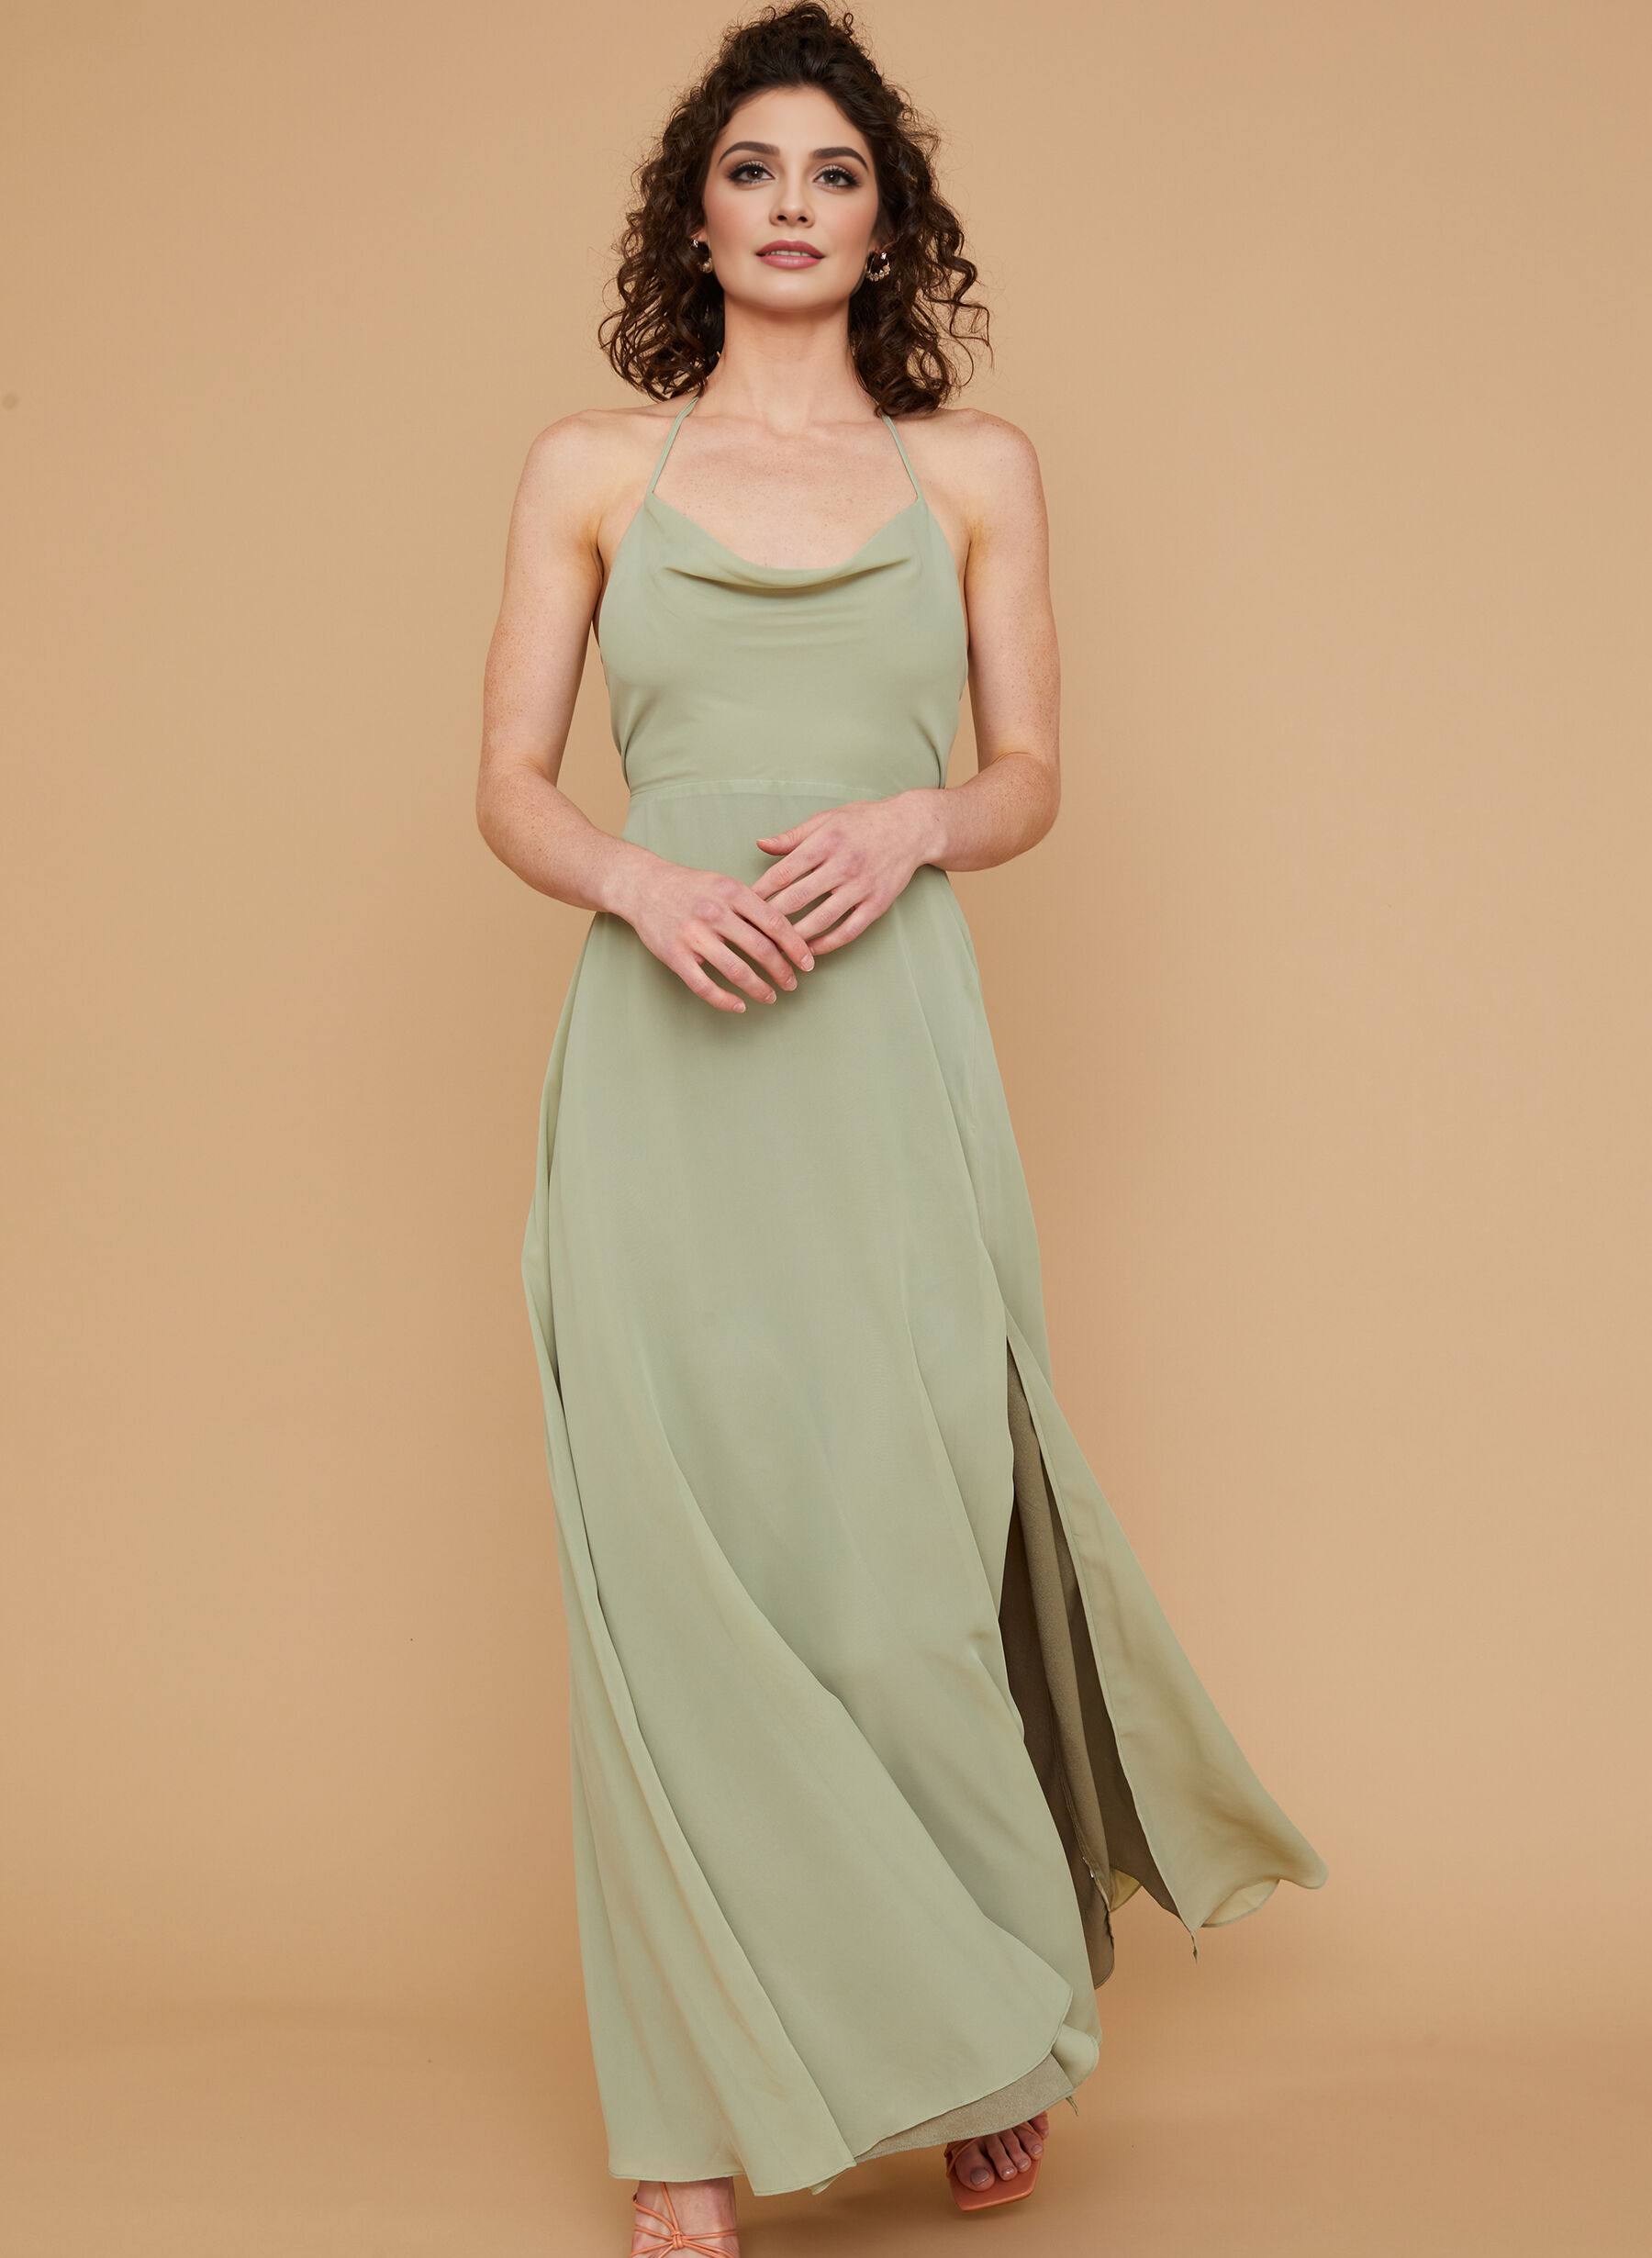 Cowl Neck A-Line Bridesmaid Dresses With Chiffon